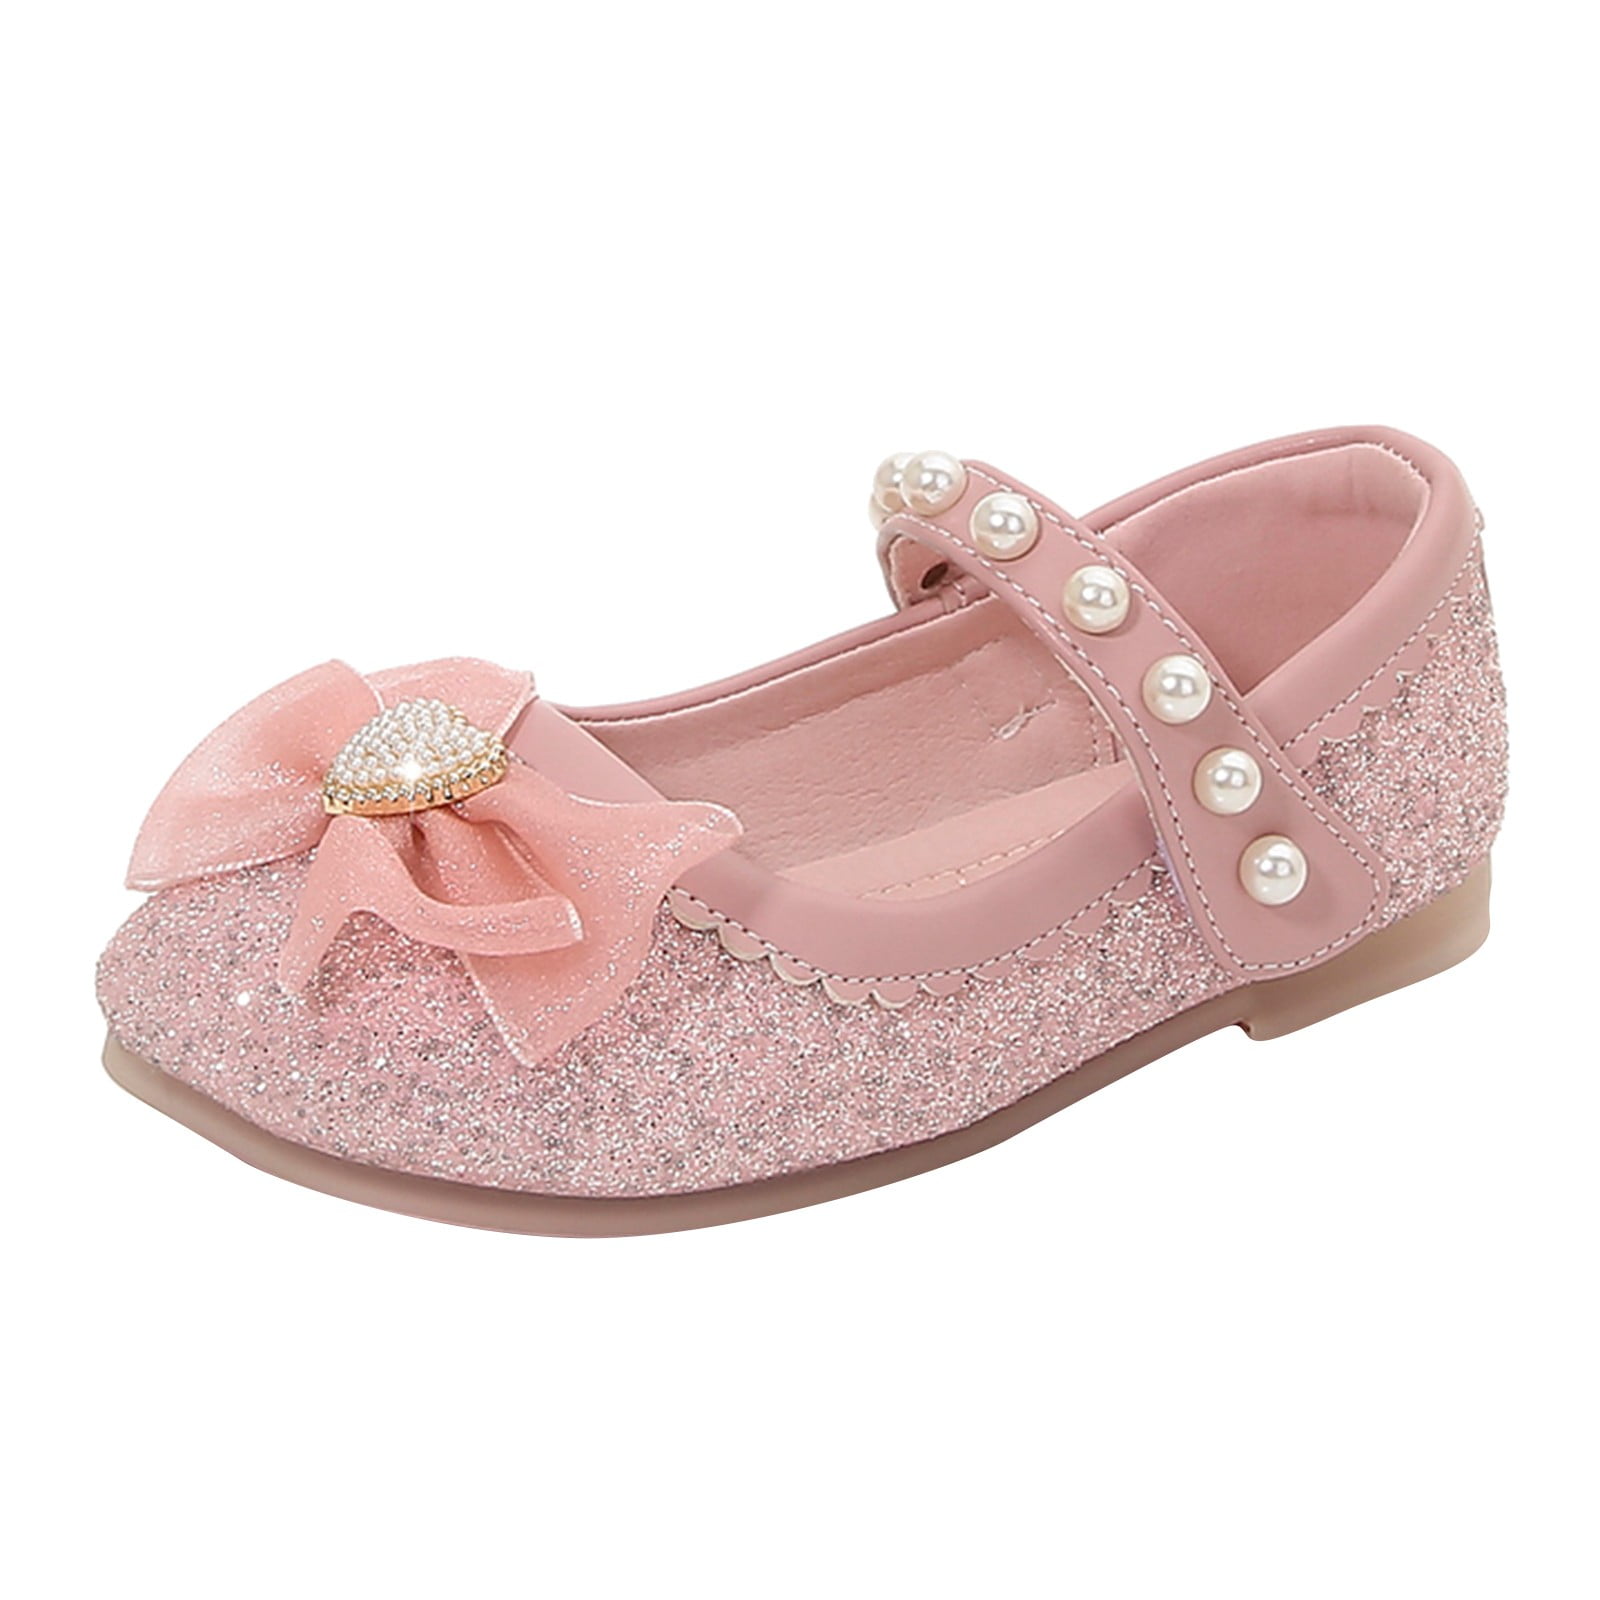 BOLUOYI Girls Shoes Girl Shoes Small Leather Shoes Single Shoes ...